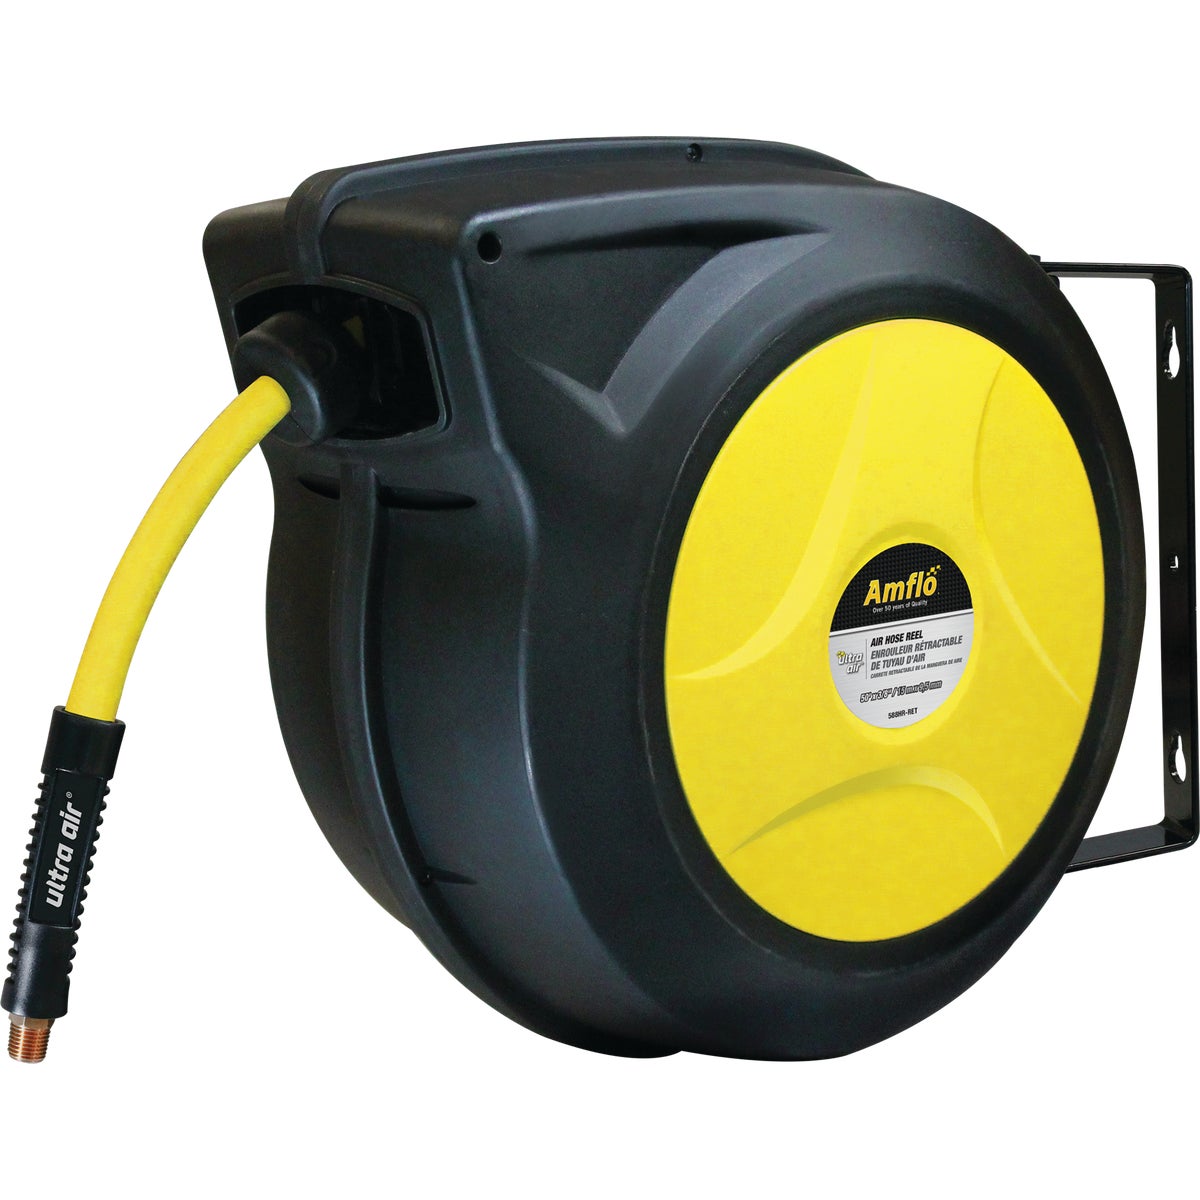 Amflo UltraAir Automatic Air Hose Reel with 3/8 In. x 50 Ft. Hybrid Hose